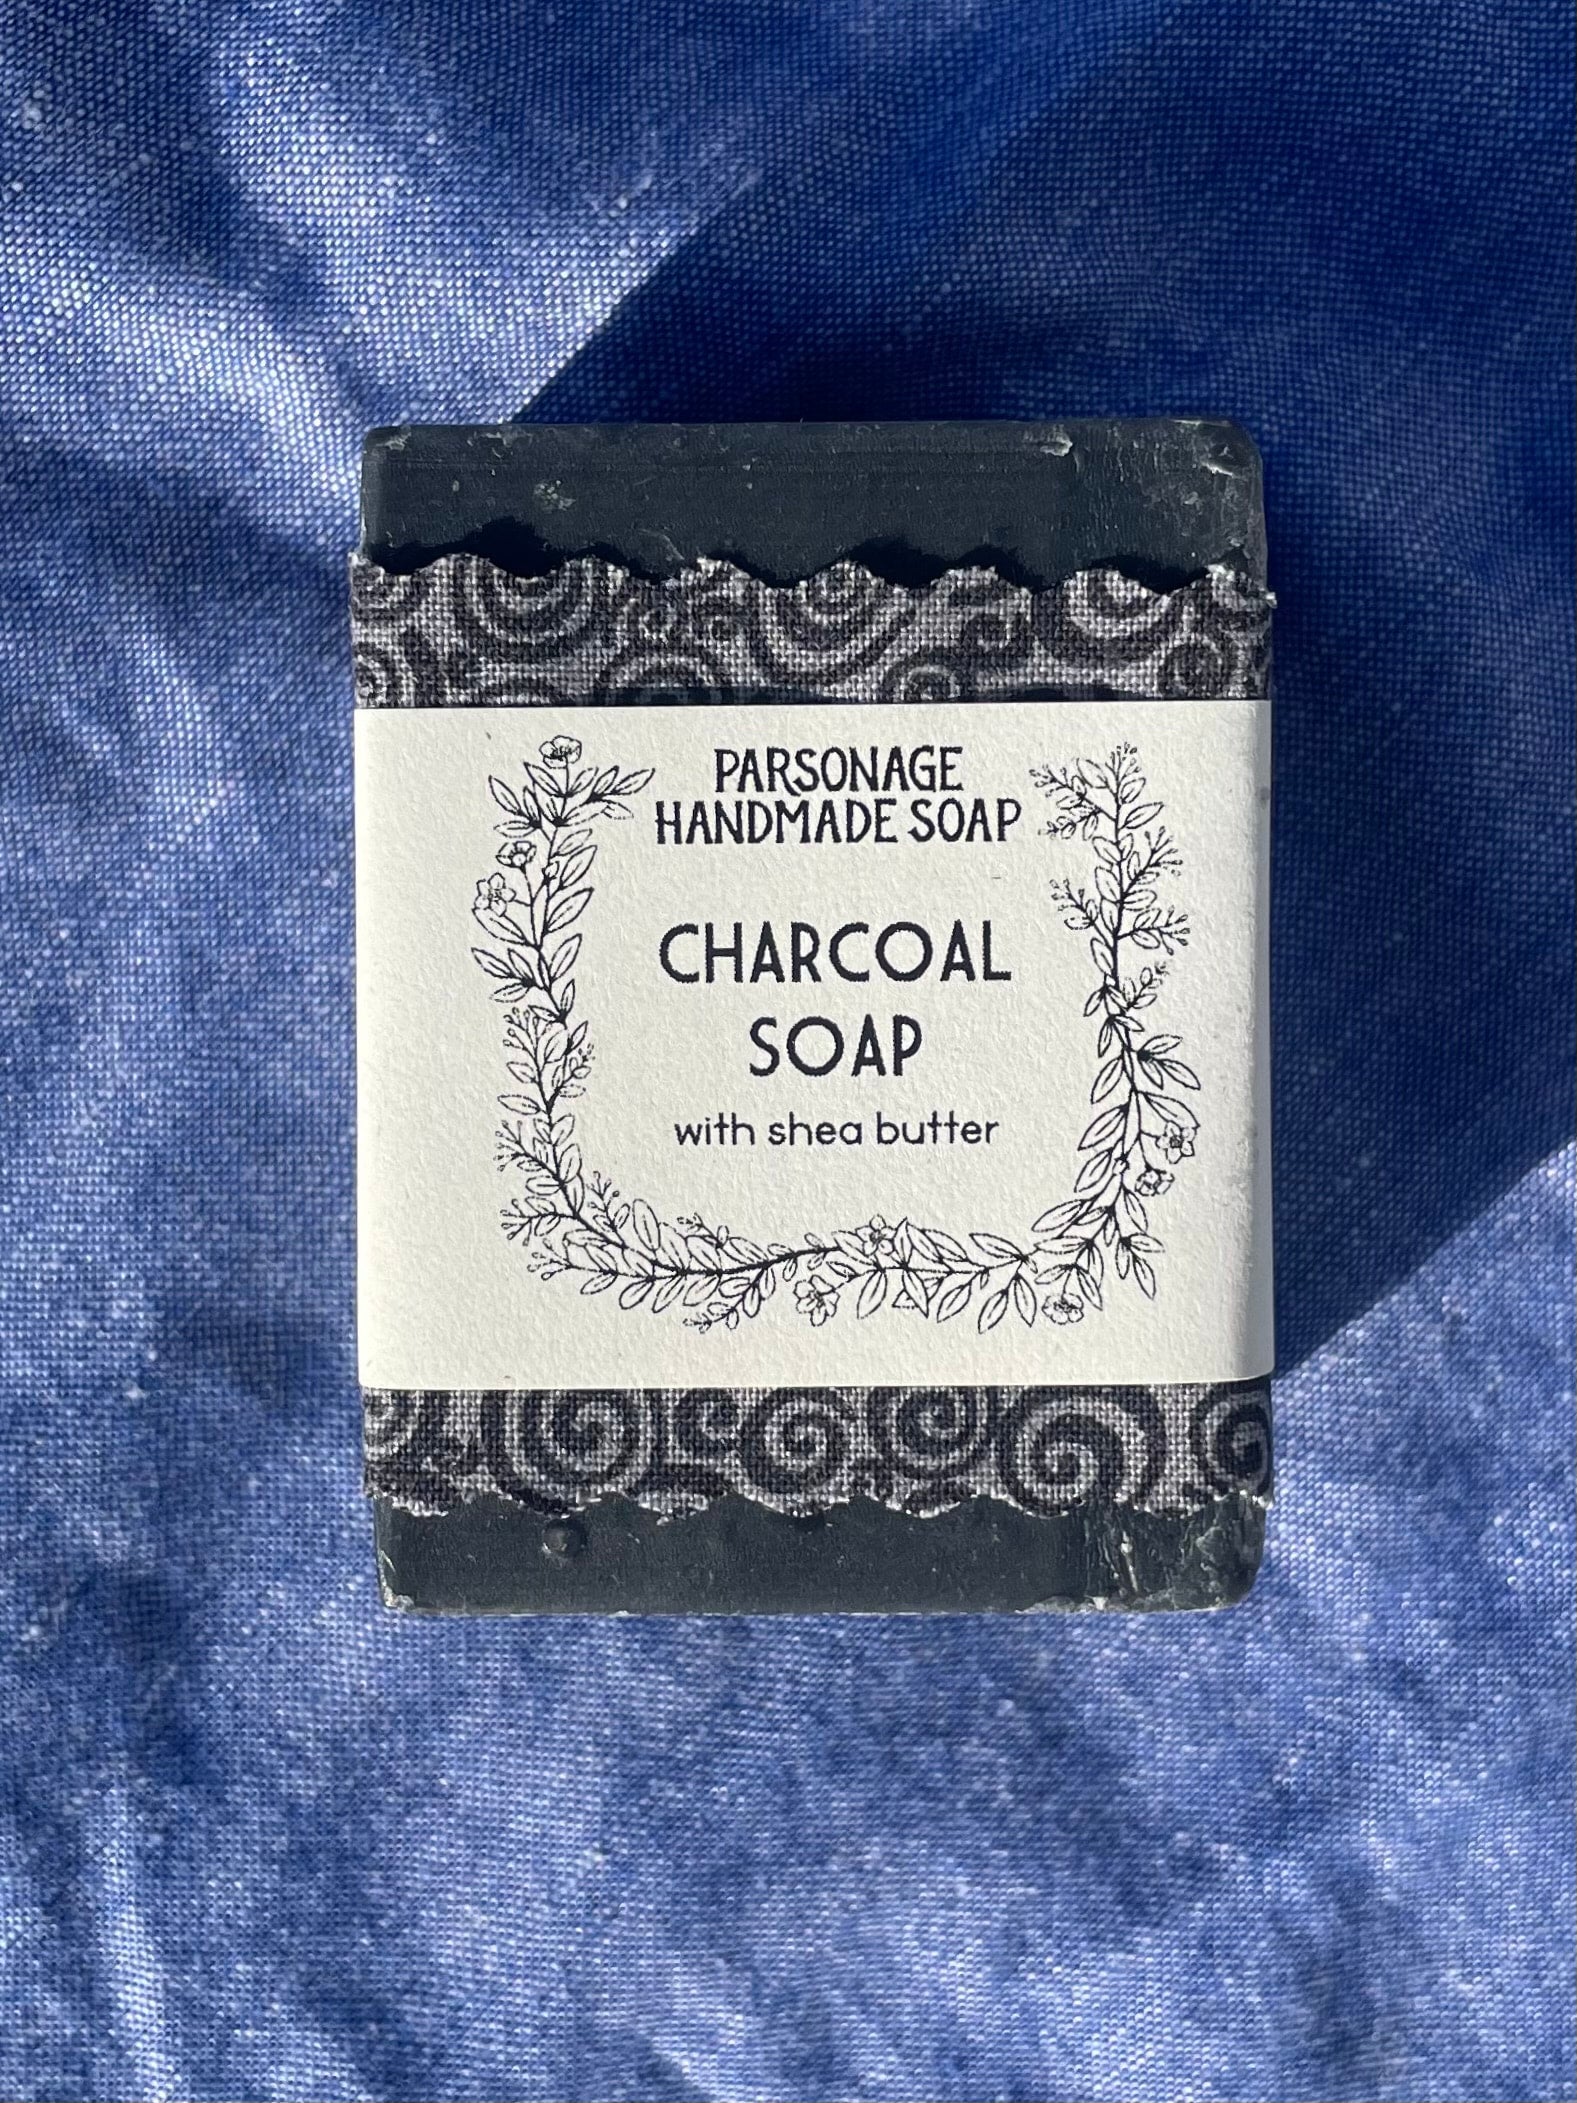 Top Reviewed Sexy Scented Dirty Boy Original Scented Charcoal Soap